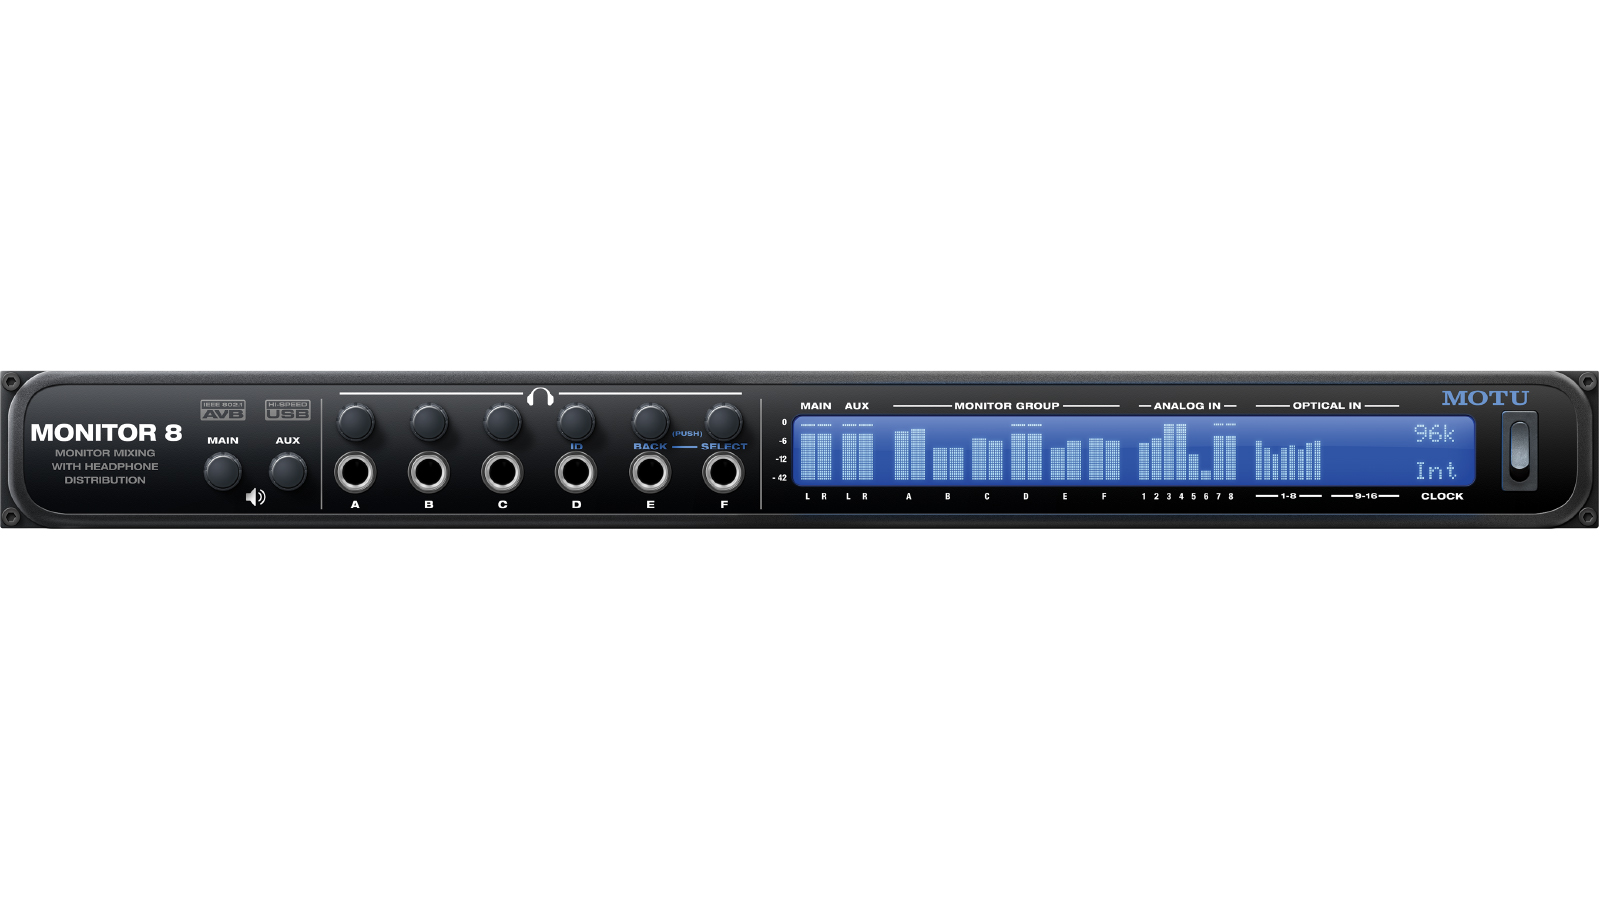 24x16x8 monitor mixer, 6-ch headphone amp with mixing/DSP